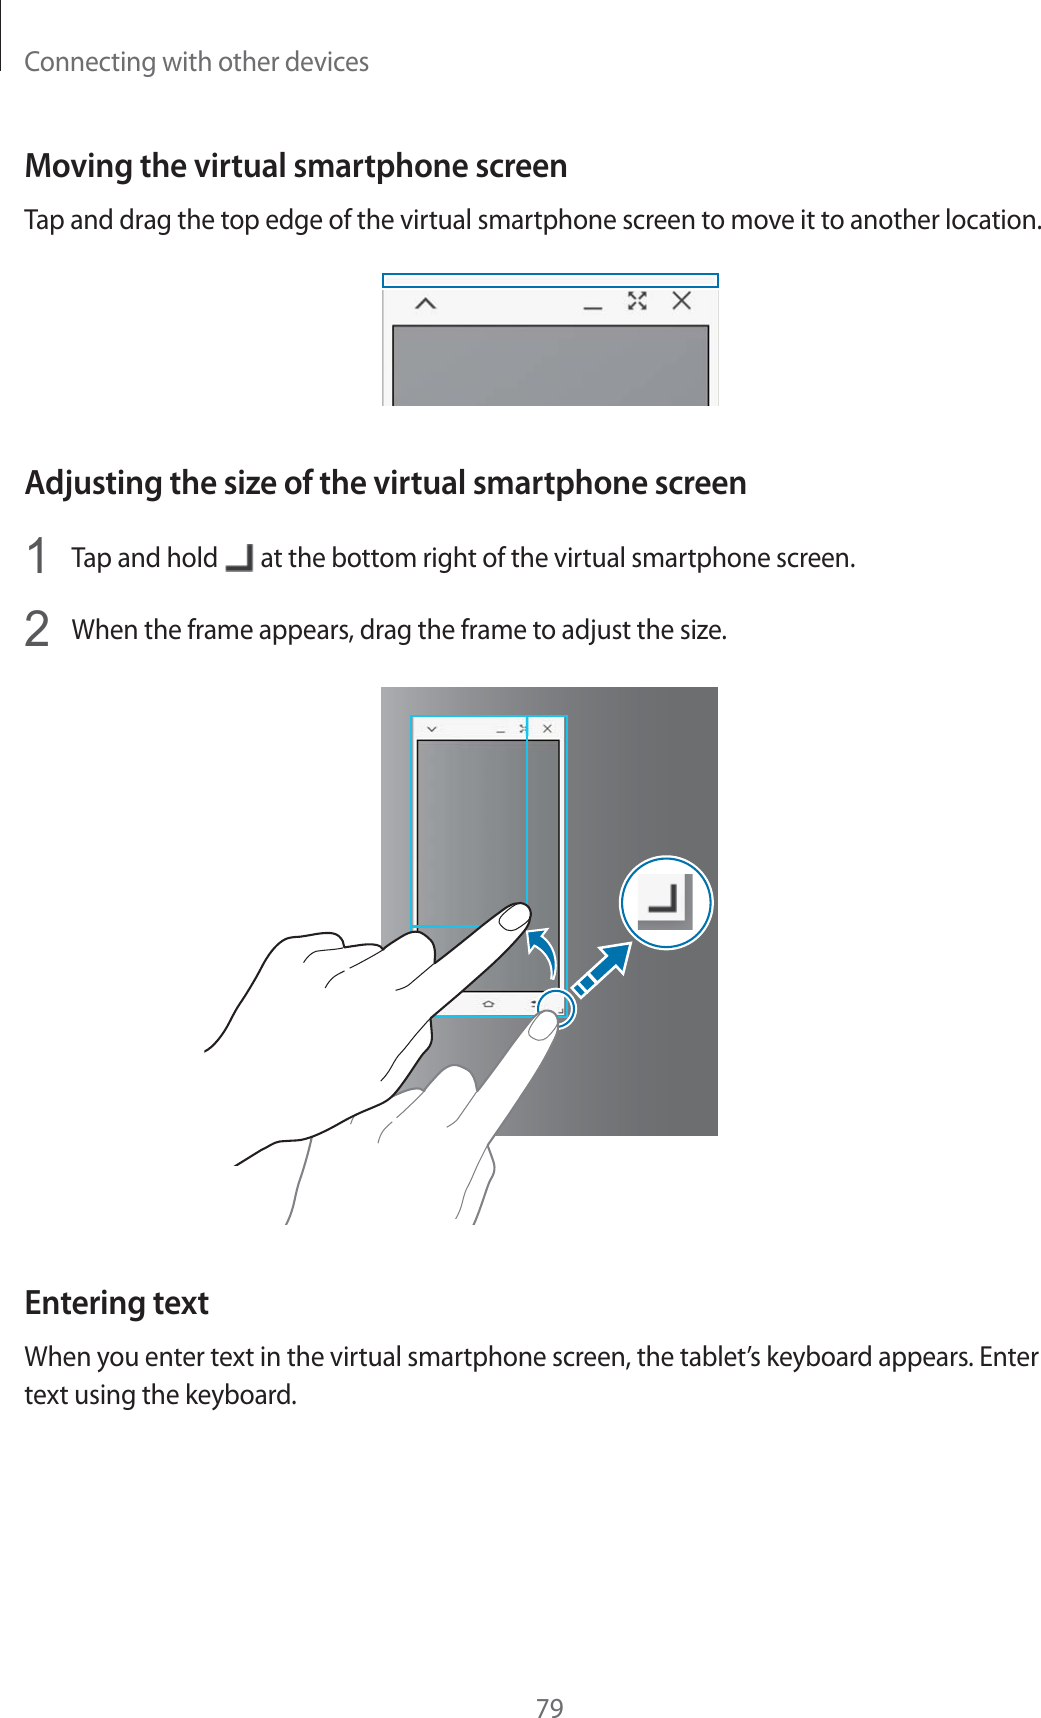 Connecting with other devices79Moving the virtual smartphone screenTap and drag the top edge of the virtual smartphone screen to move it to another location.Adjusting the size of the virtual smartphone screen1Tap and hold   at the bottom right of the virtual smartphone screen.2When the frame appears, drag the frame to adjust the size.Entering textWhen you enter text in the virtual smartphone screen, the tablet’s keyboard appears. Enter text using the keyboard.